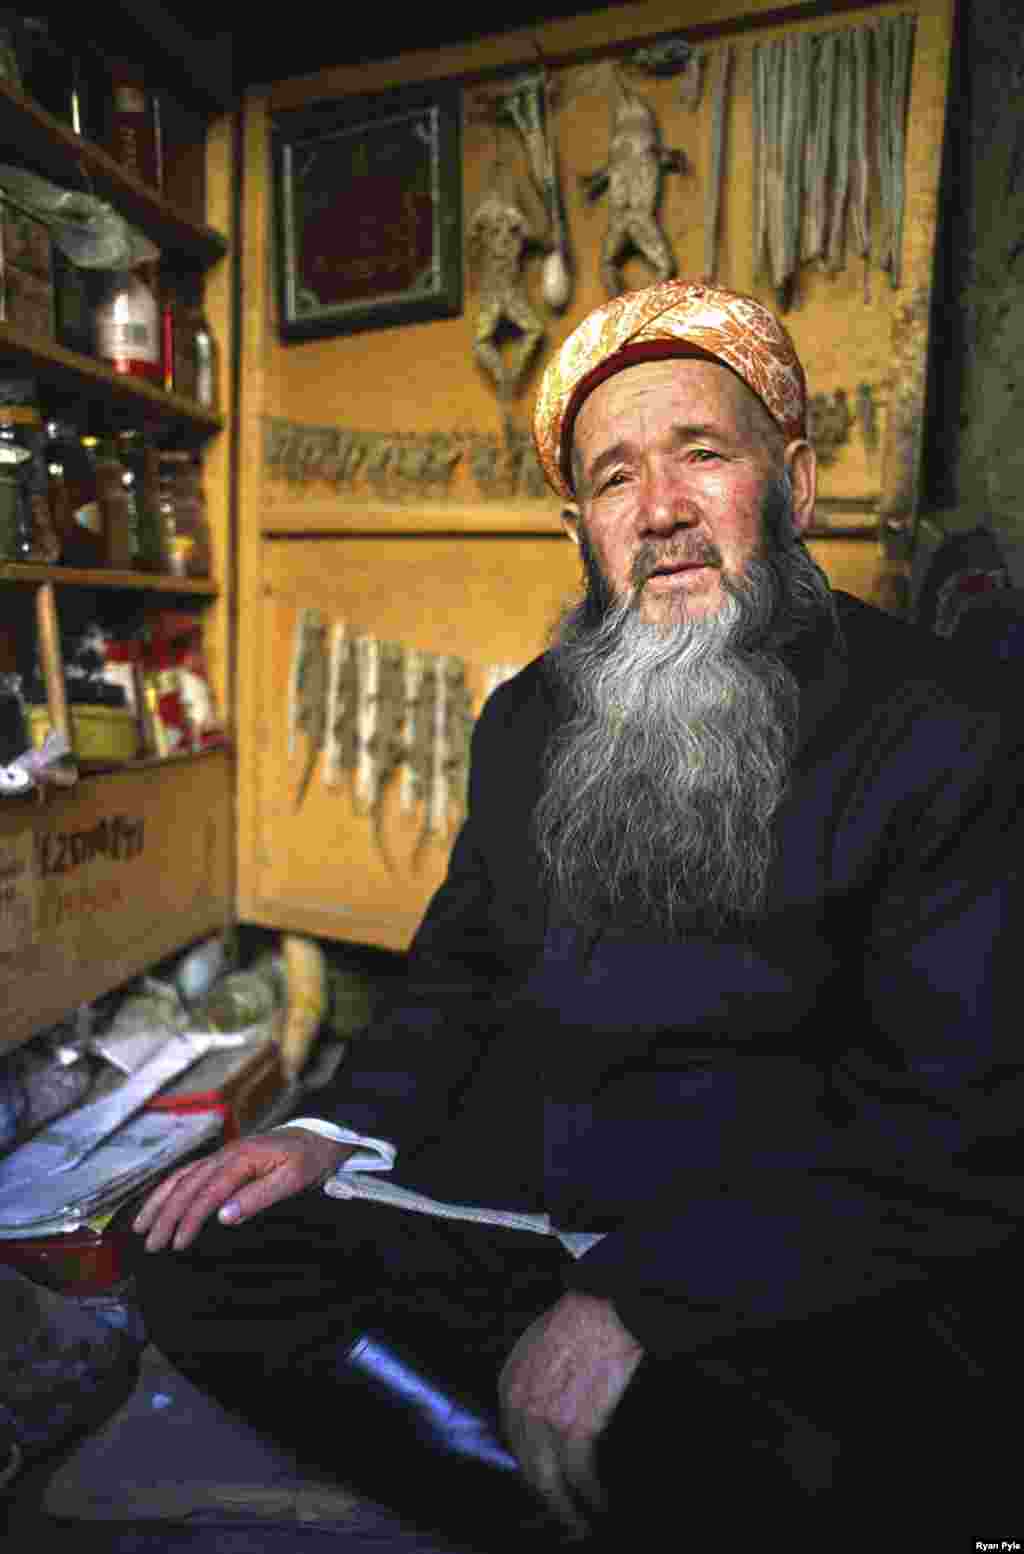 A medicine man - Many see a political aspect to the redevelopment project in Kashgar, which Chinese officials consider a breeding ground for Uyghur separatism.